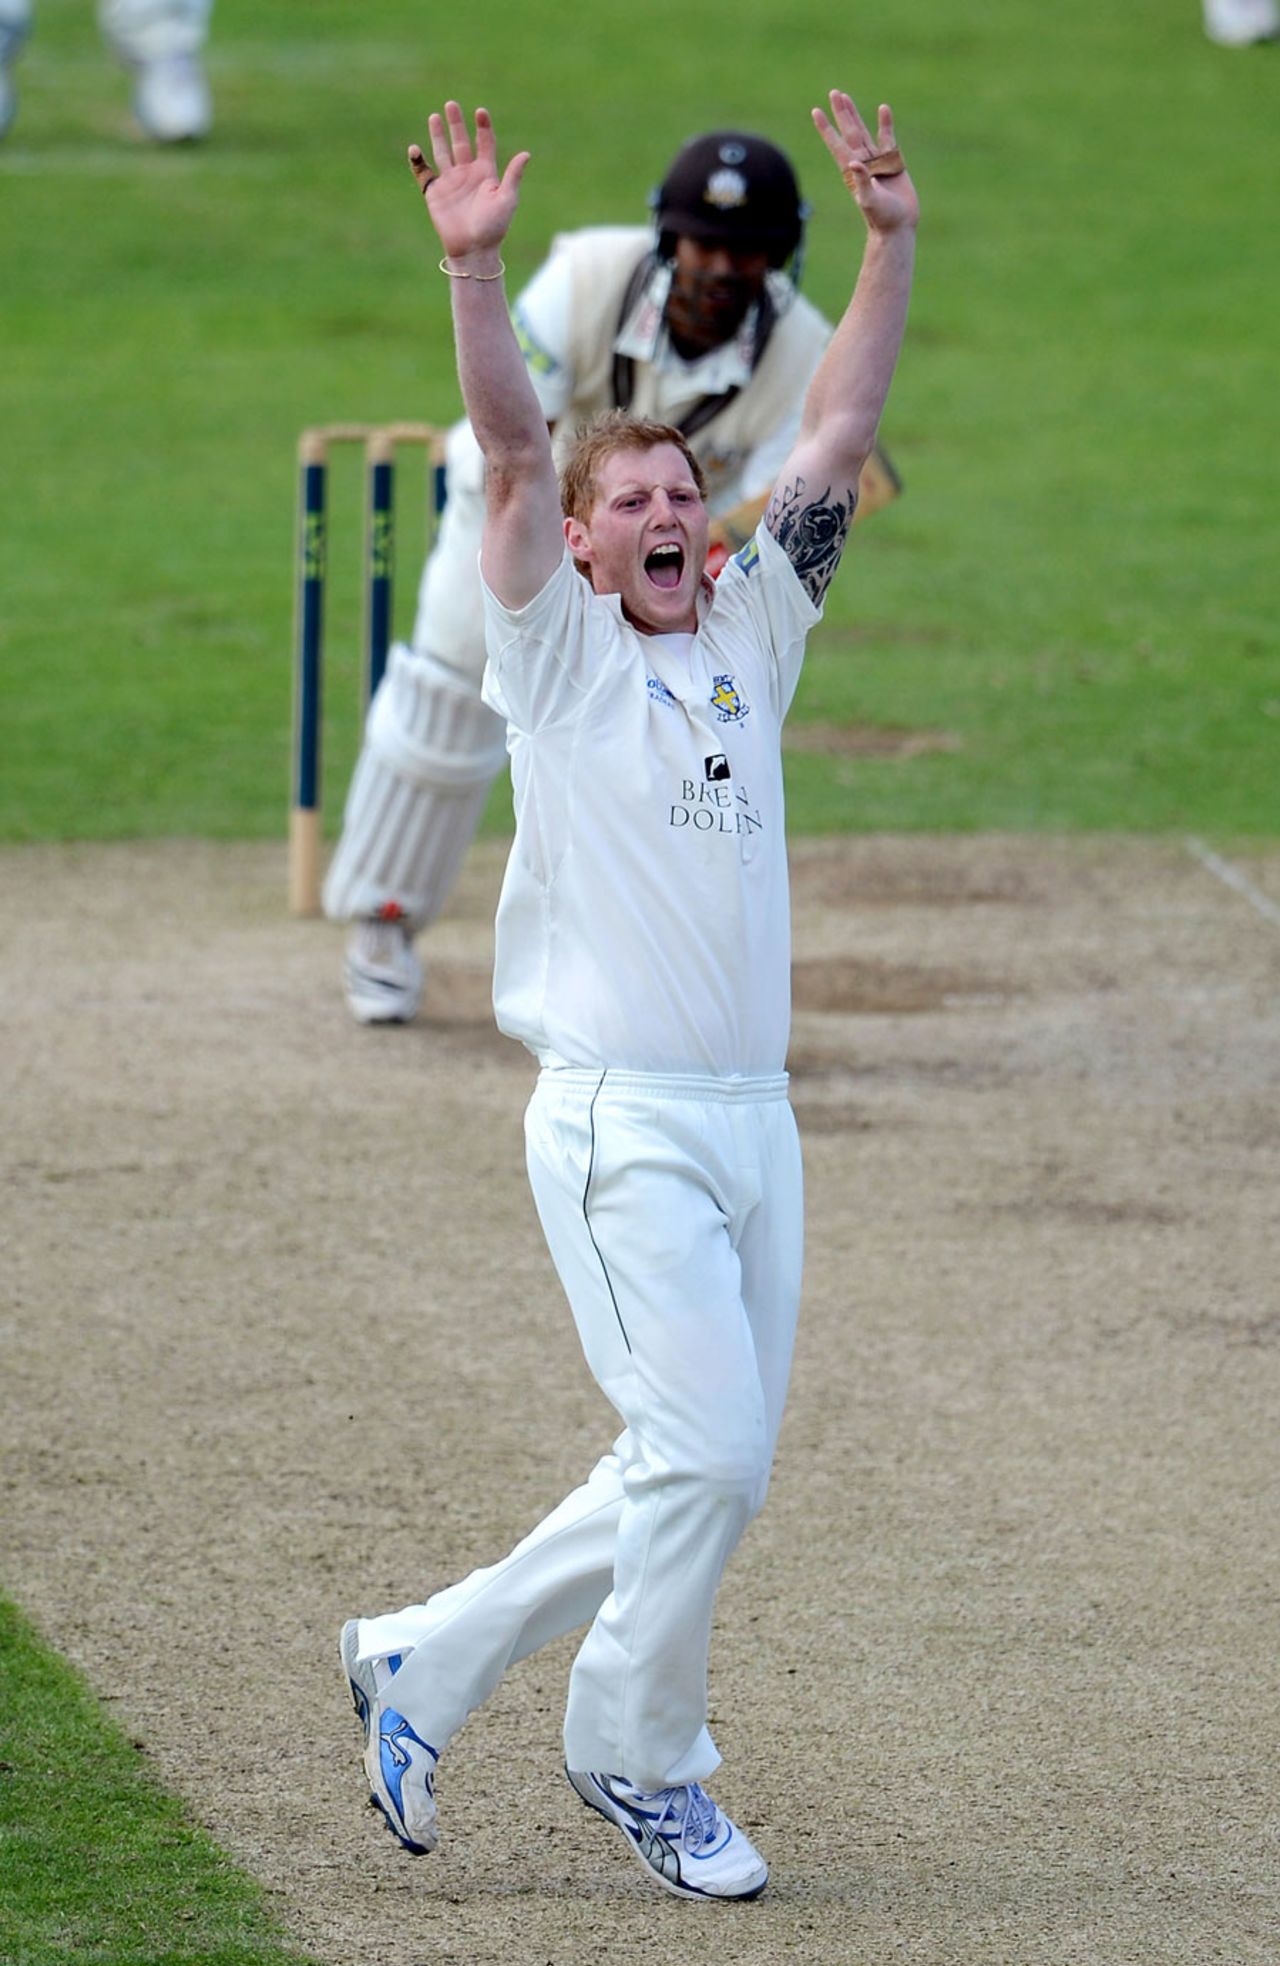 Ben Stokes appeals for the wicket of Arun Harinath, Durham v Surrey, County Championship Division One, Chester-le-Street, 2nd day